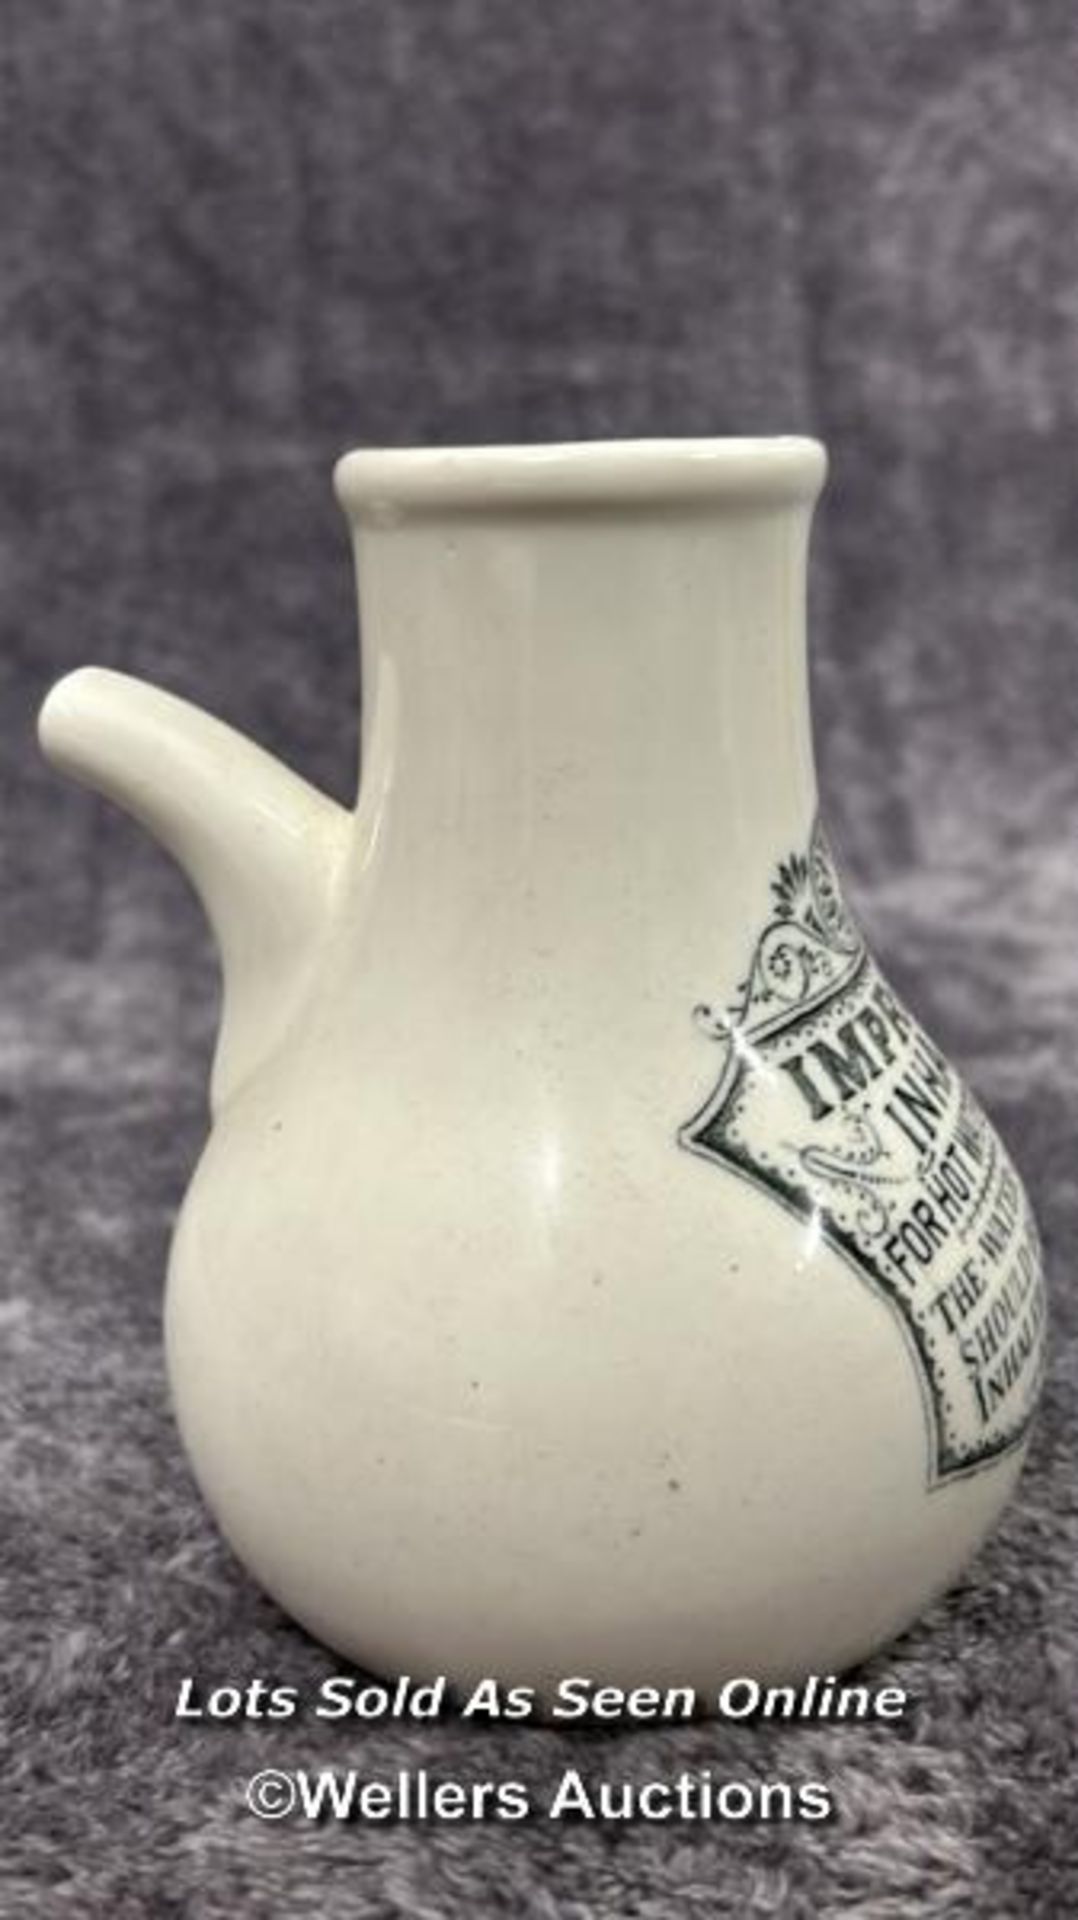 Three 19th century ceramic inhalers including two Boots Dr. Nelson's, tallest 19cm high / AN20 - Image 7 of 7